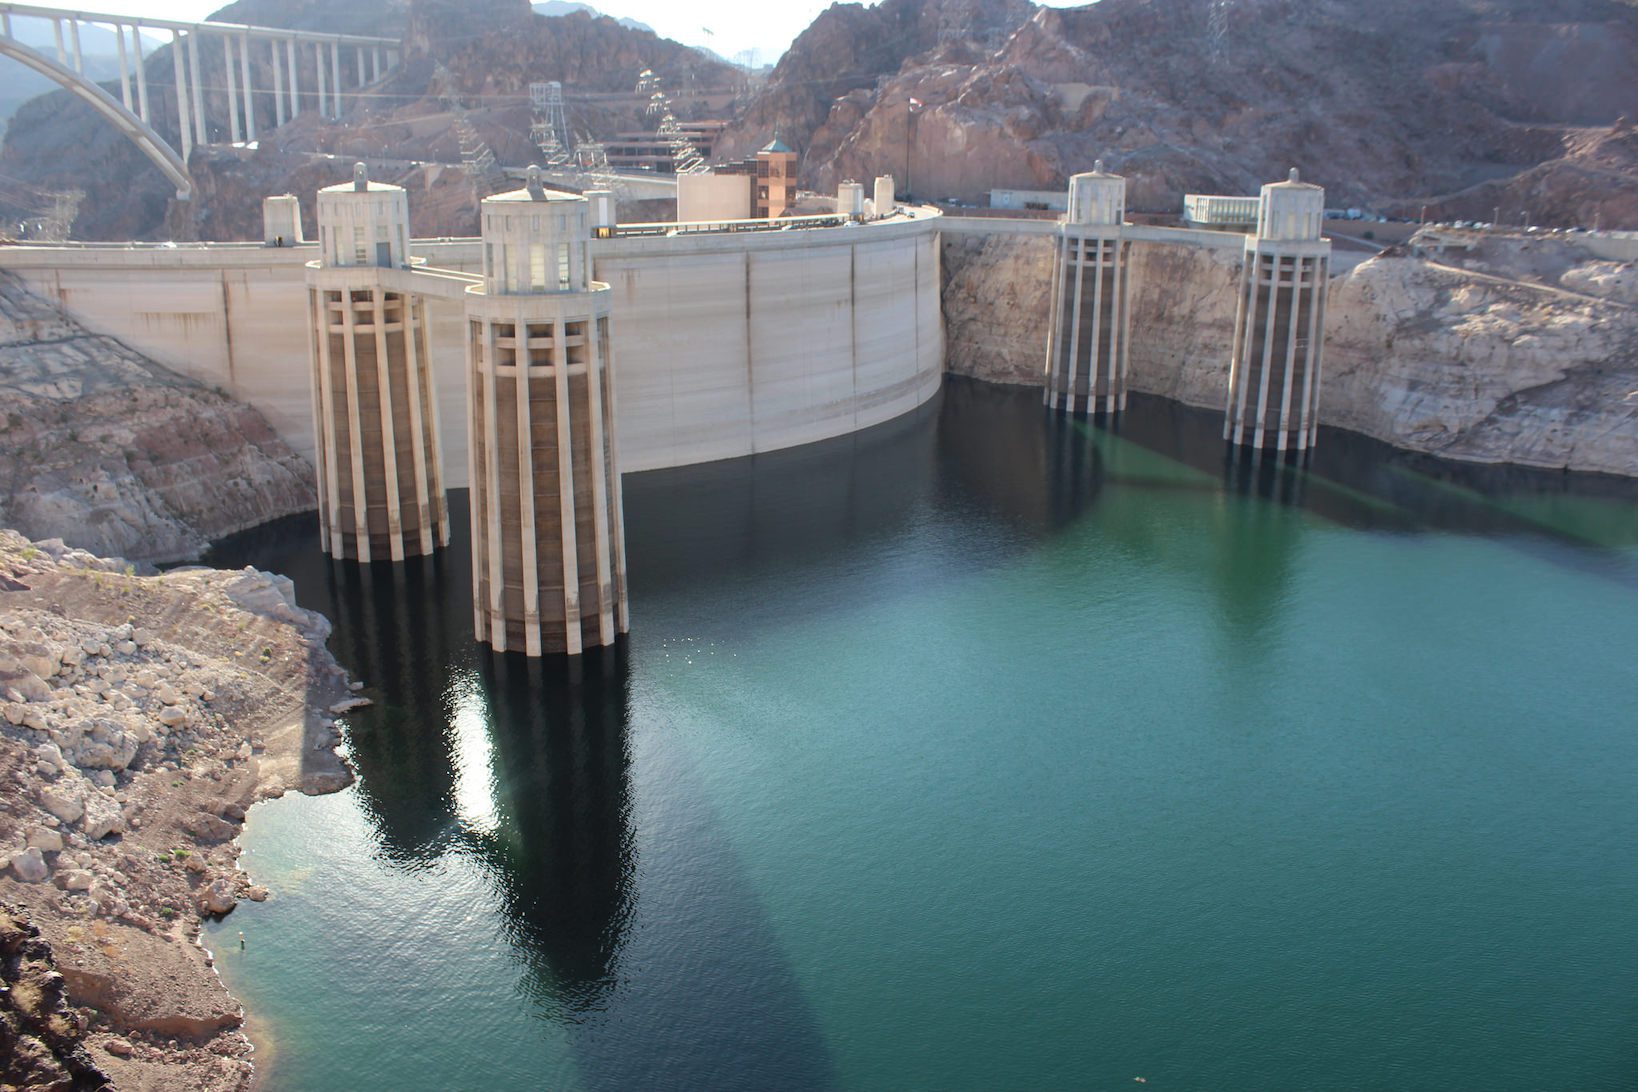 Hoover Dam Intake Towers on the Colorado River